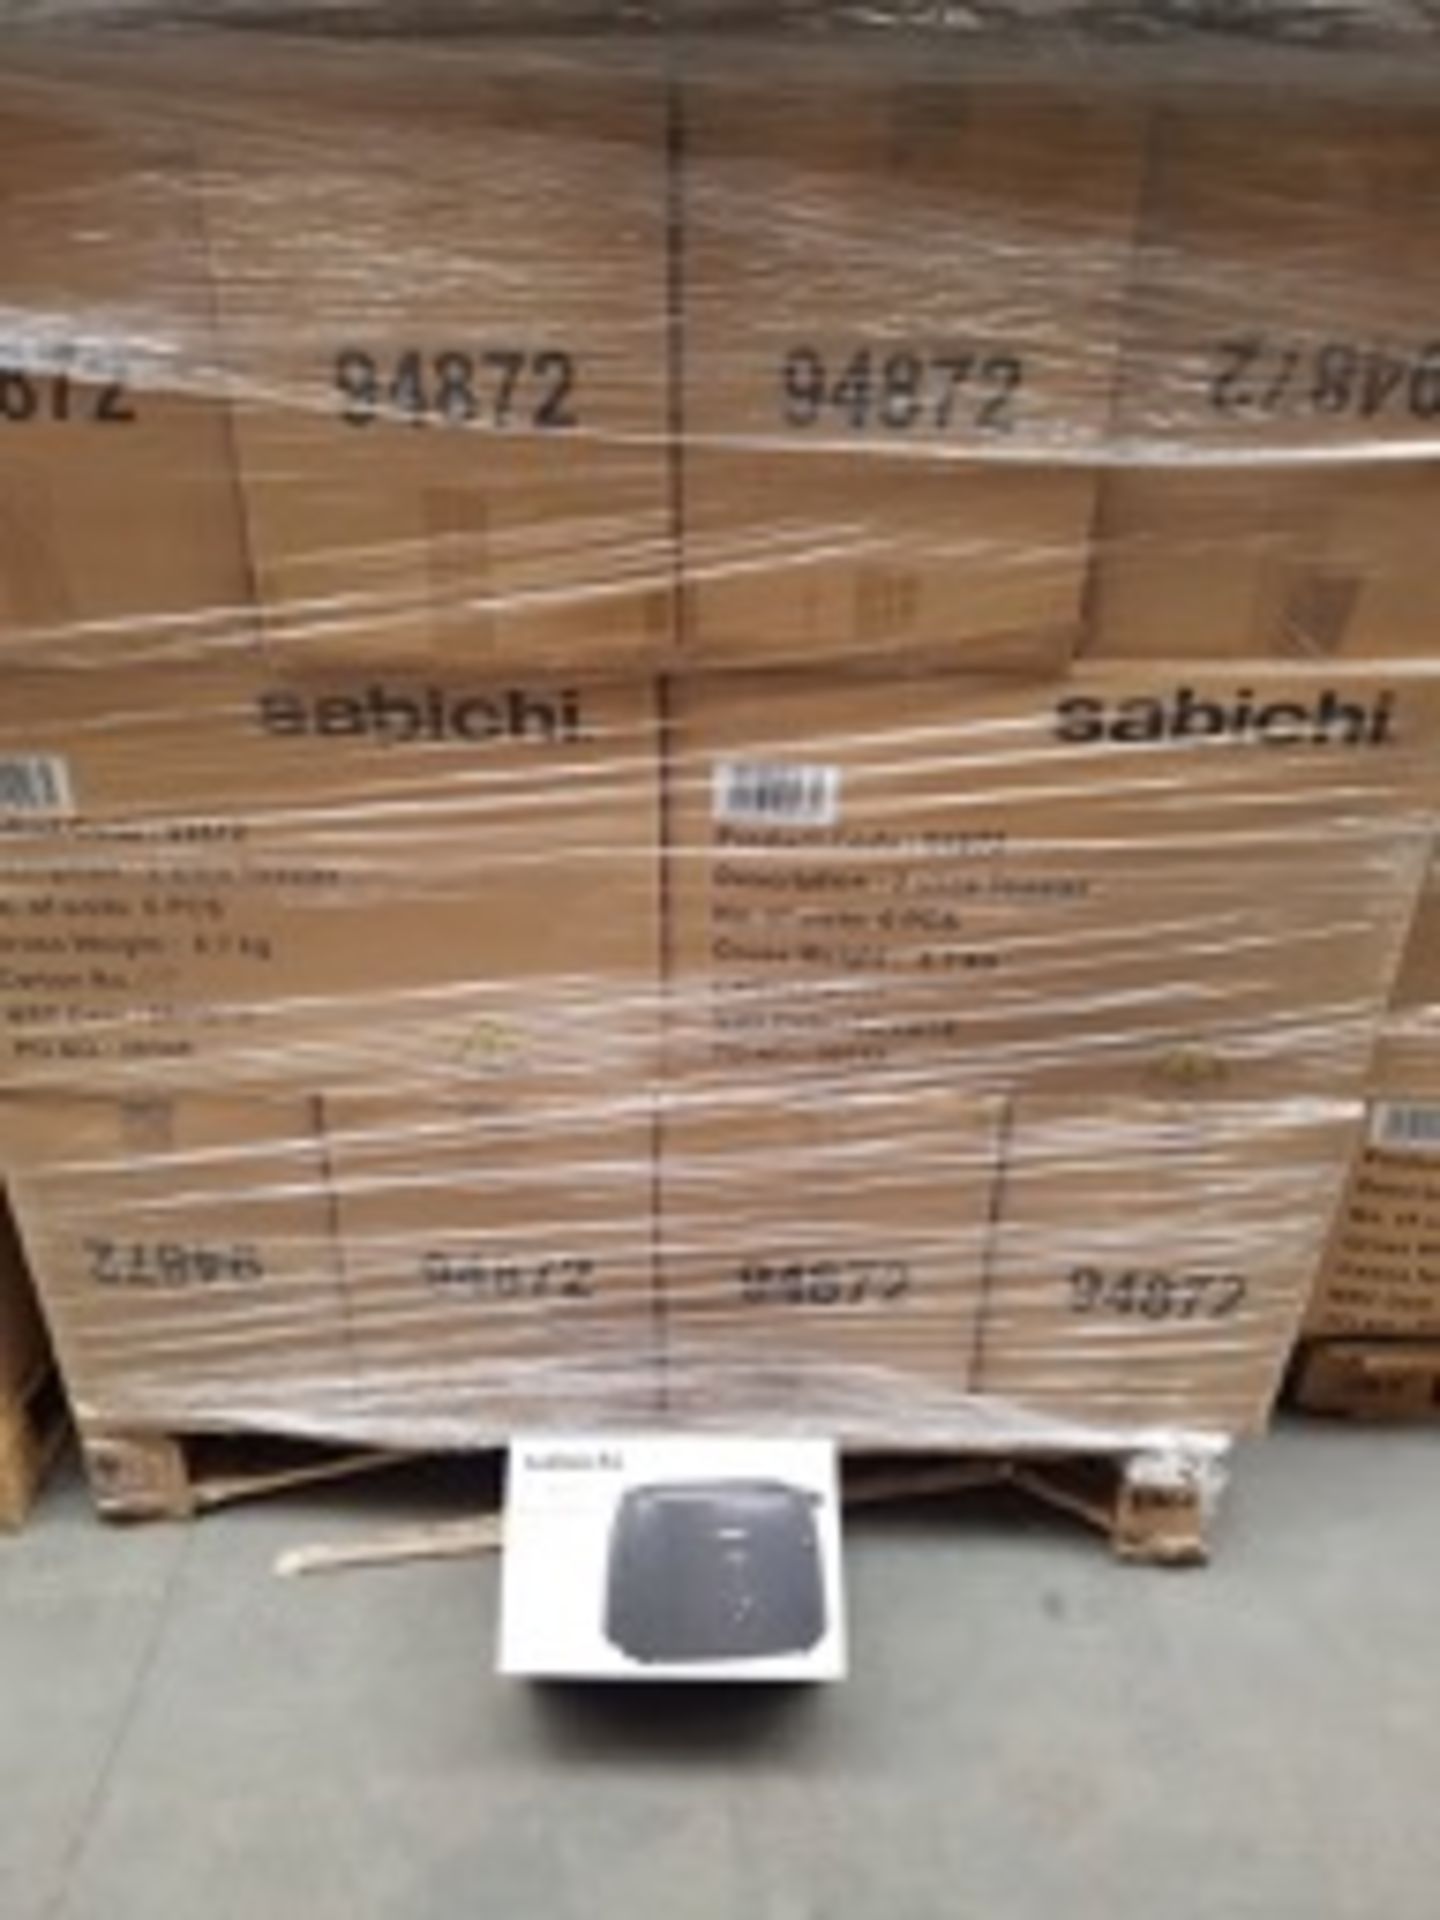 PALLET TO CONTAIN 96 x Sabichi 2 Slice Toasters with Viable Browning Control & Cord Storage. RRP £ - Image 2 of 2